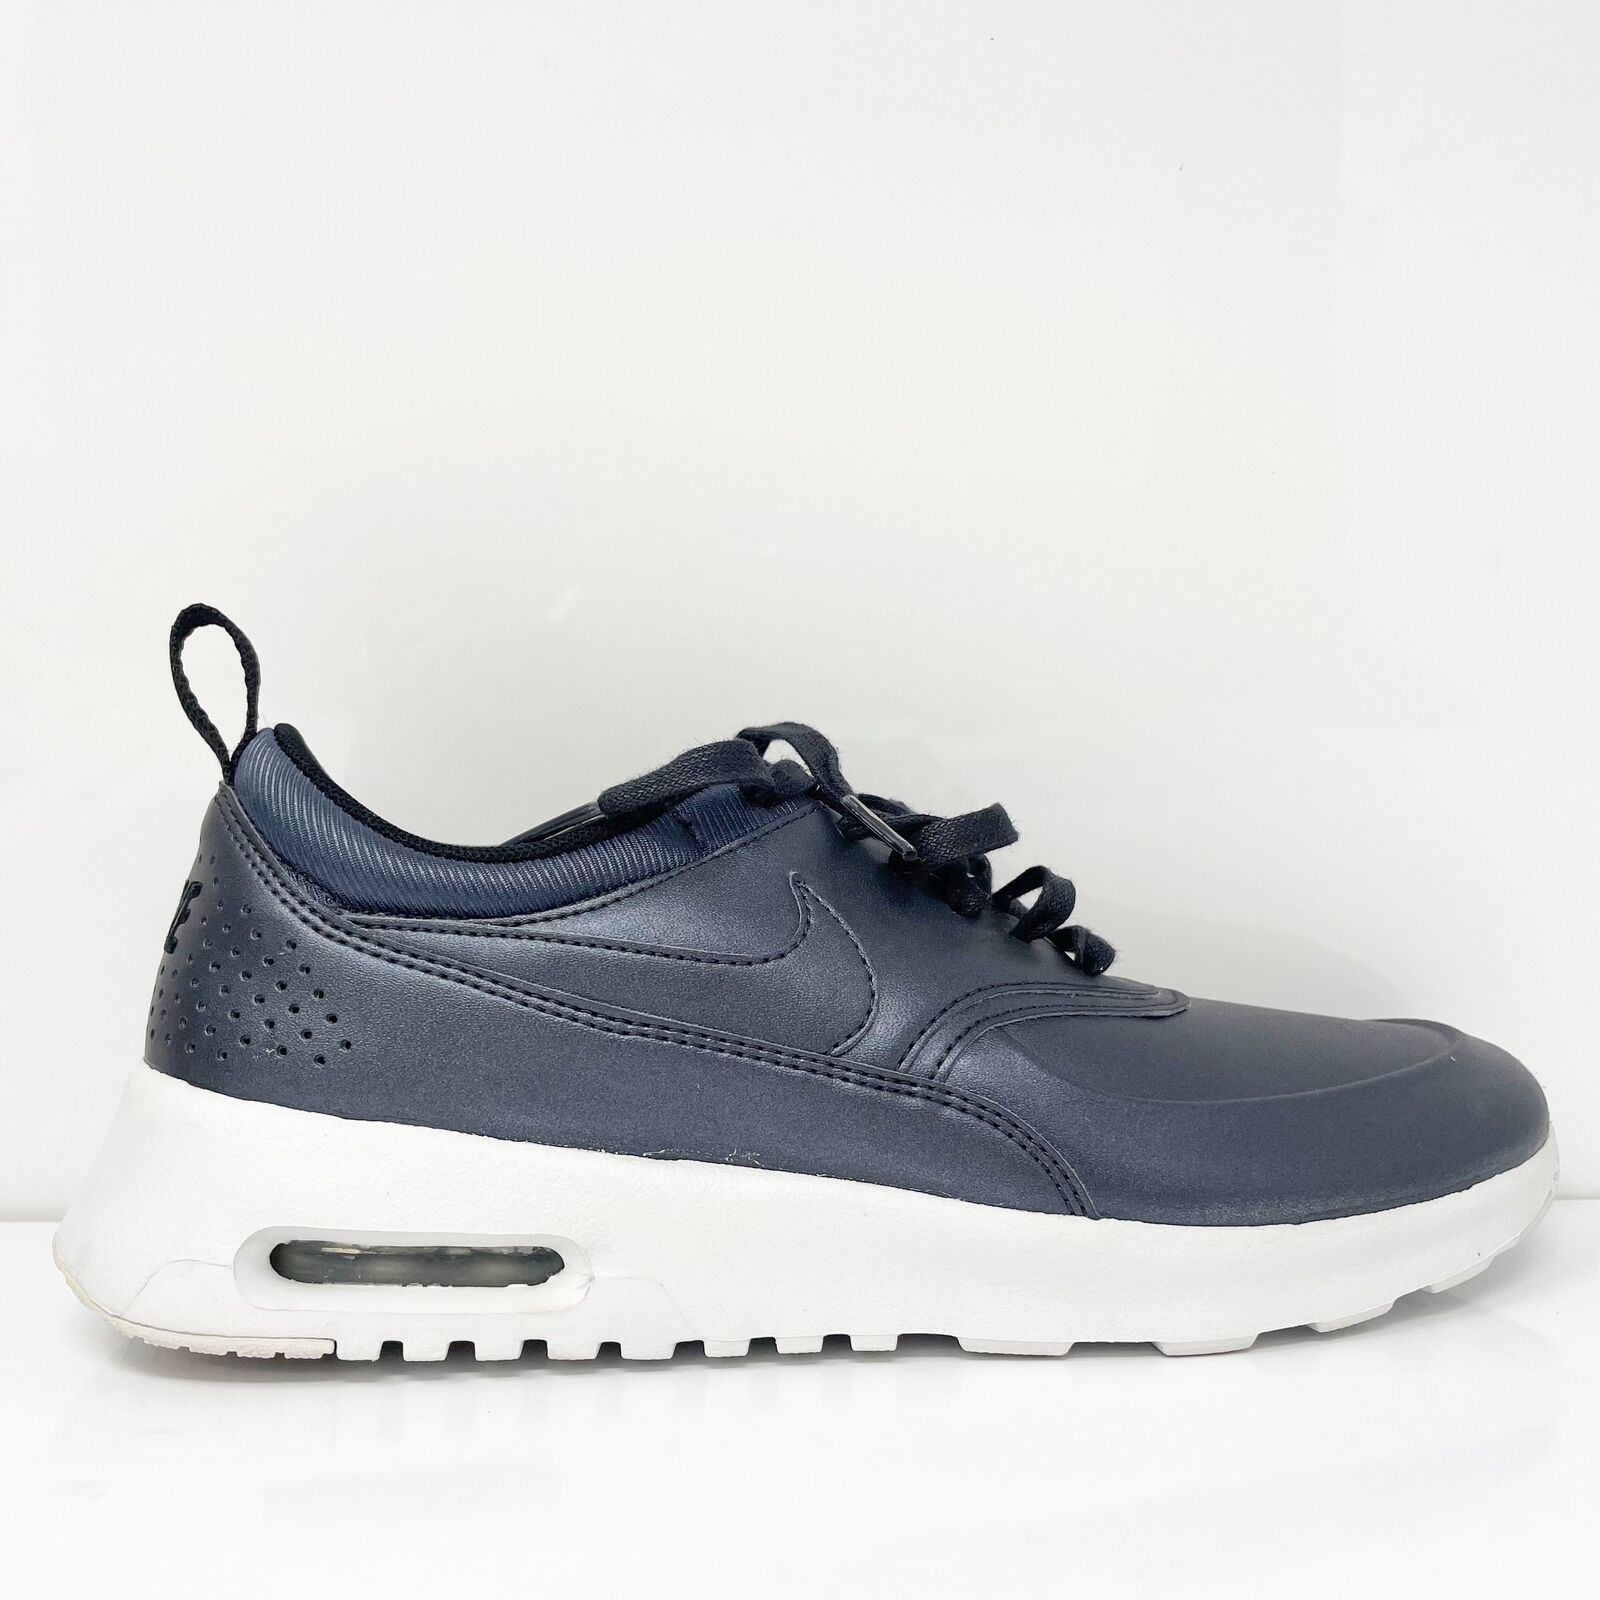 Nike Womens Air Max Thea SE 861674-002 Gray Casual Shoes Sneakers Size ...